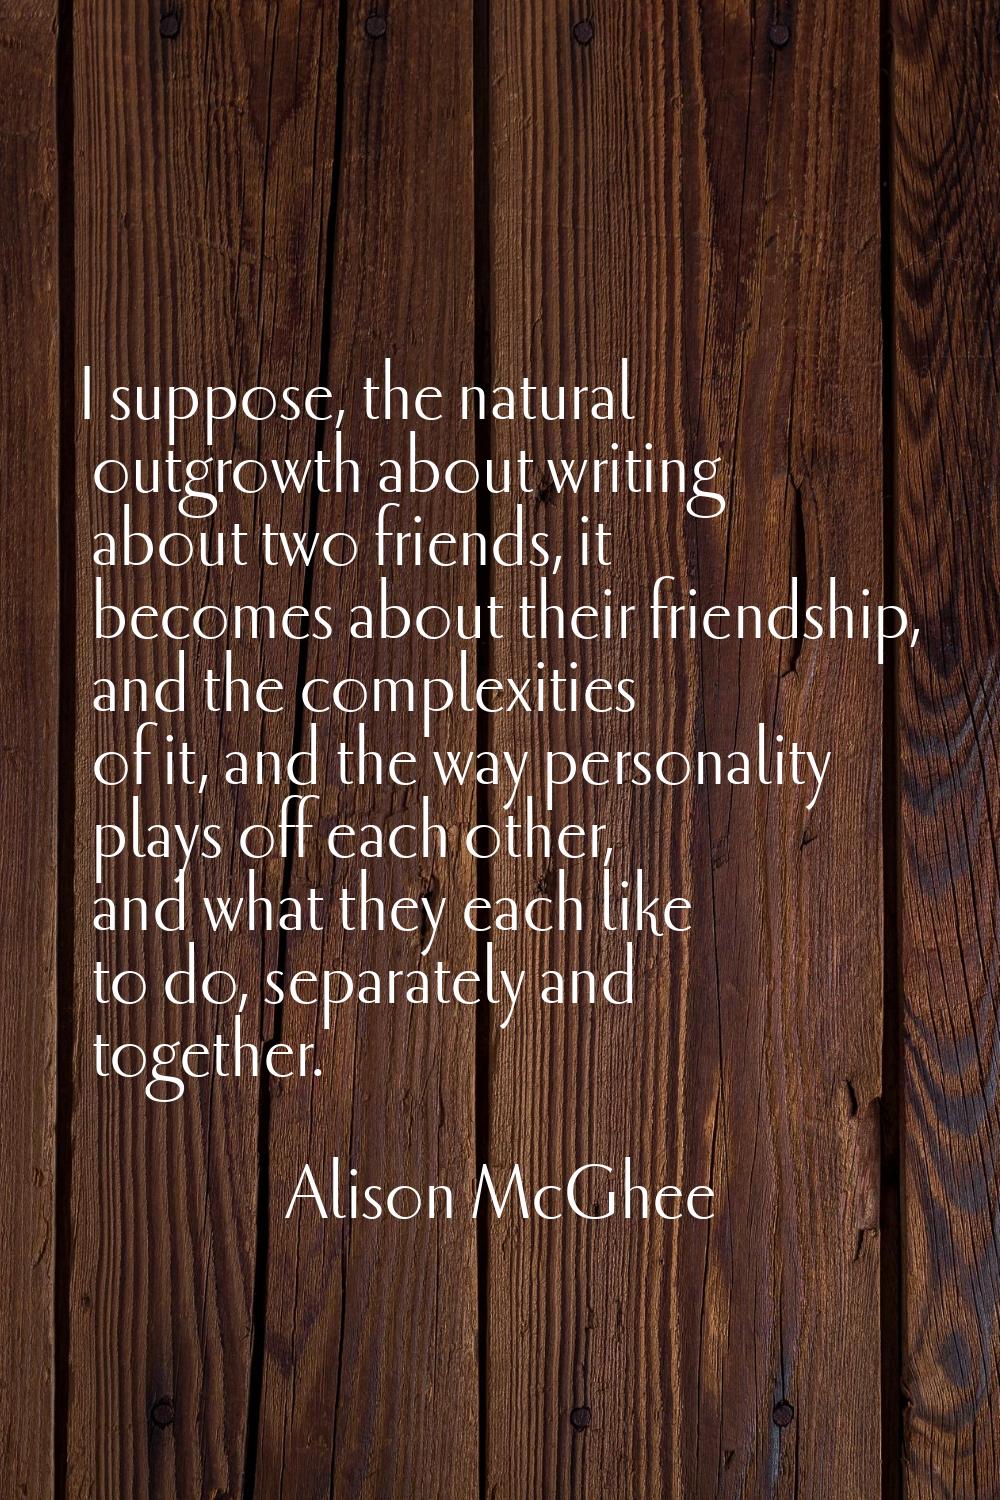 I suppose, the natural outgrowth about writing about two friends, it becomes about their friendship